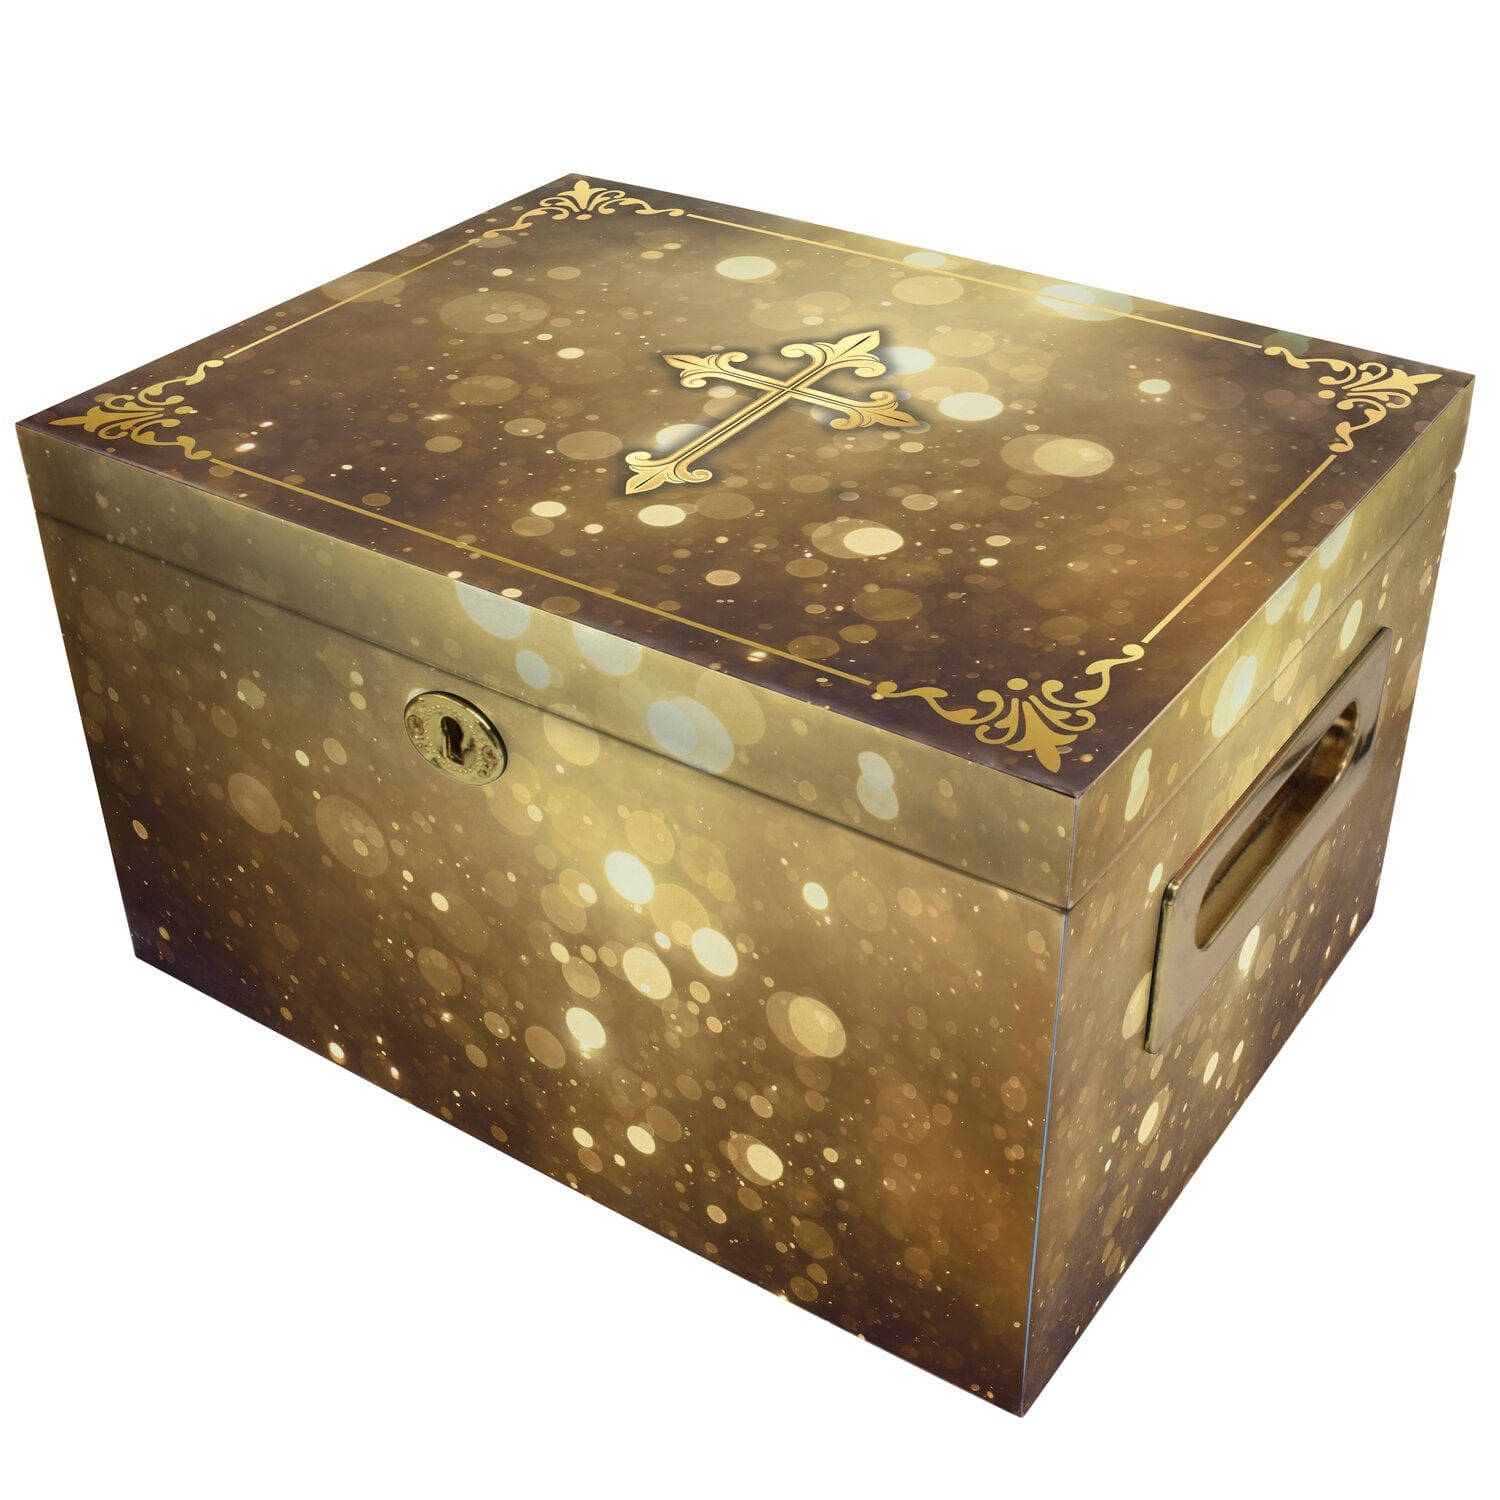 Commemorative Cremation Urns Urn Collection Chest Shining His Light (Gold) Memorial Collection Chest Cremation Urn